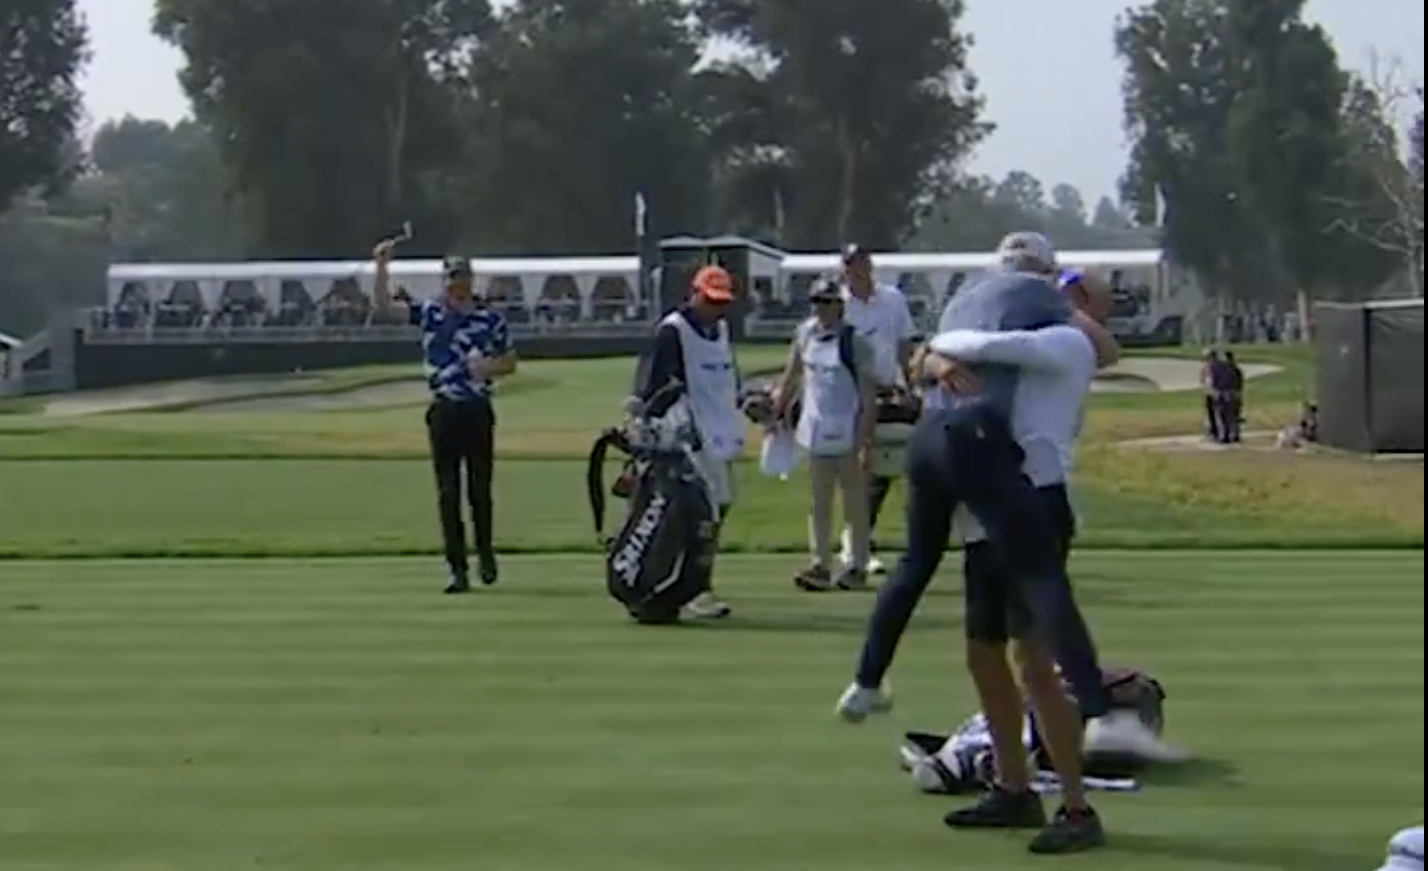 Will Zalatoris hugging his caddie after making a hole-in-one